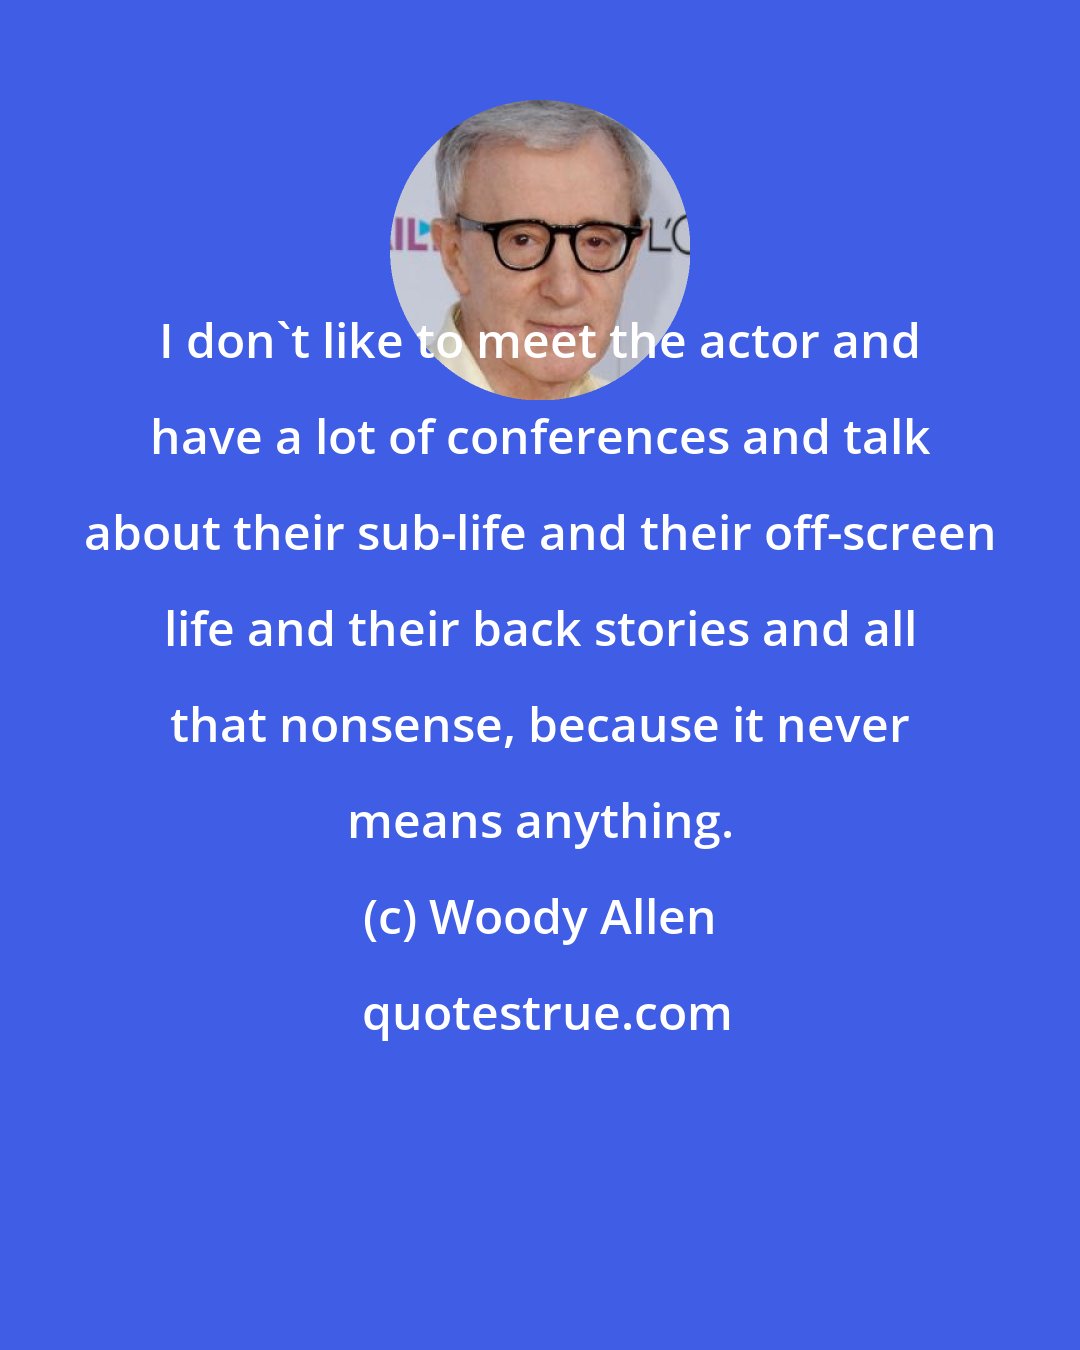 Woody Allen: I don't like to meet the actor and have a lot of conferences and talk about their sub-life and their off-screen life and their back stories and all that nonsense, because it never means anything.